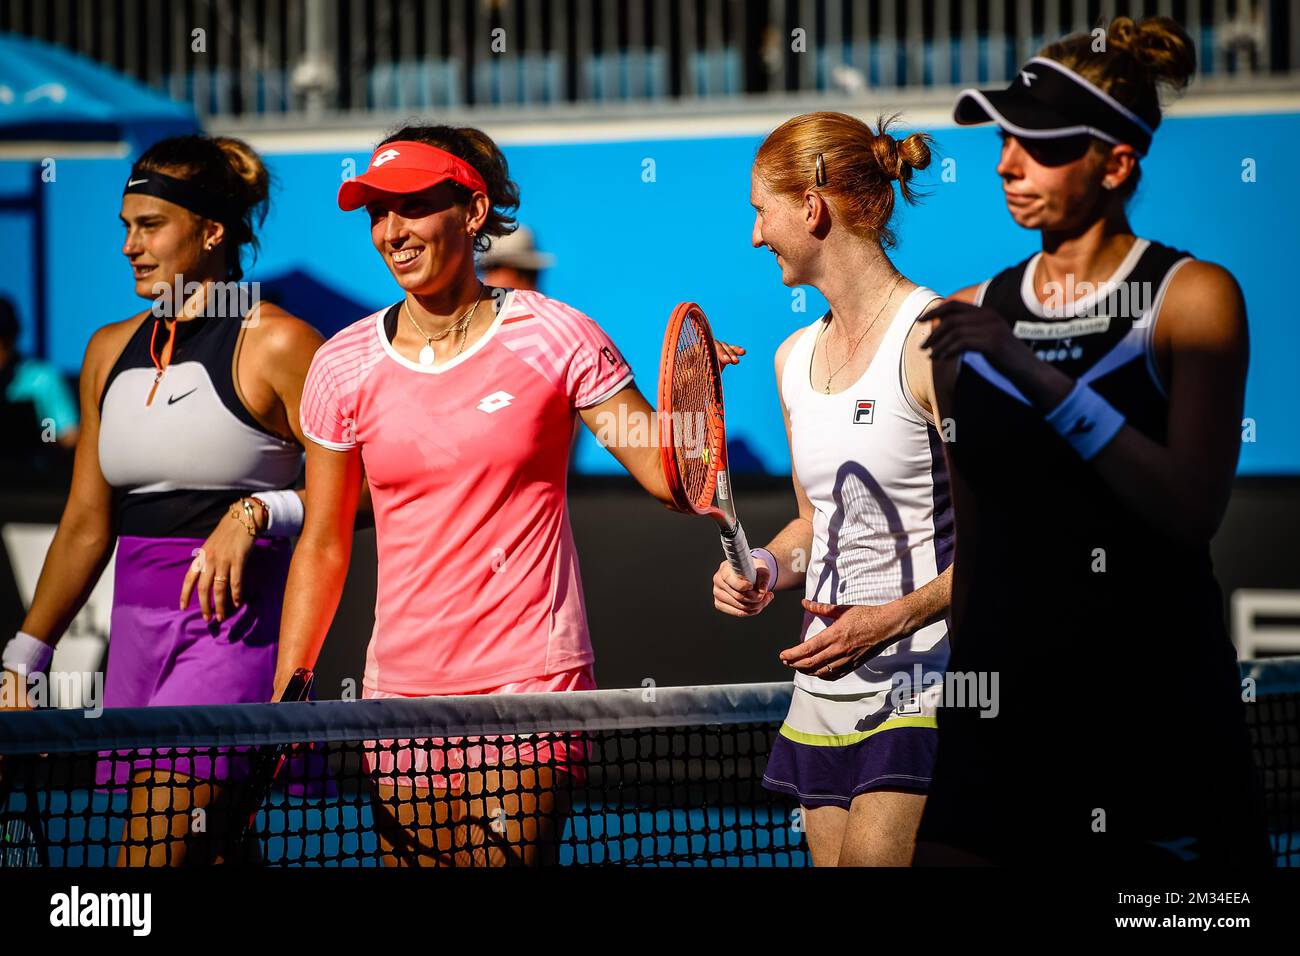 L-R, Belgian Elise Mertens, Belarussian Aryna Sabalenka won over Belgian Alison Van Uytvanck and Swedish Cornelia Lister at a tennis match between the Belgian-Swedish pair Van Uytvank and Lister and the Belgian-Belarus pair Mertens and Sabalenka, in the first round of the women's doubles competition of the 'Australian Open' tennis Grand Slam, Wednesday 10 February 2021 in Melbourne Park, Melbourne, Australia. The 2021 edition of the Australian Grand Slam has been delayed by three week because of the ongoing pandemic. BELGA PHOTO PATRICK HAMILTON Stock Photo